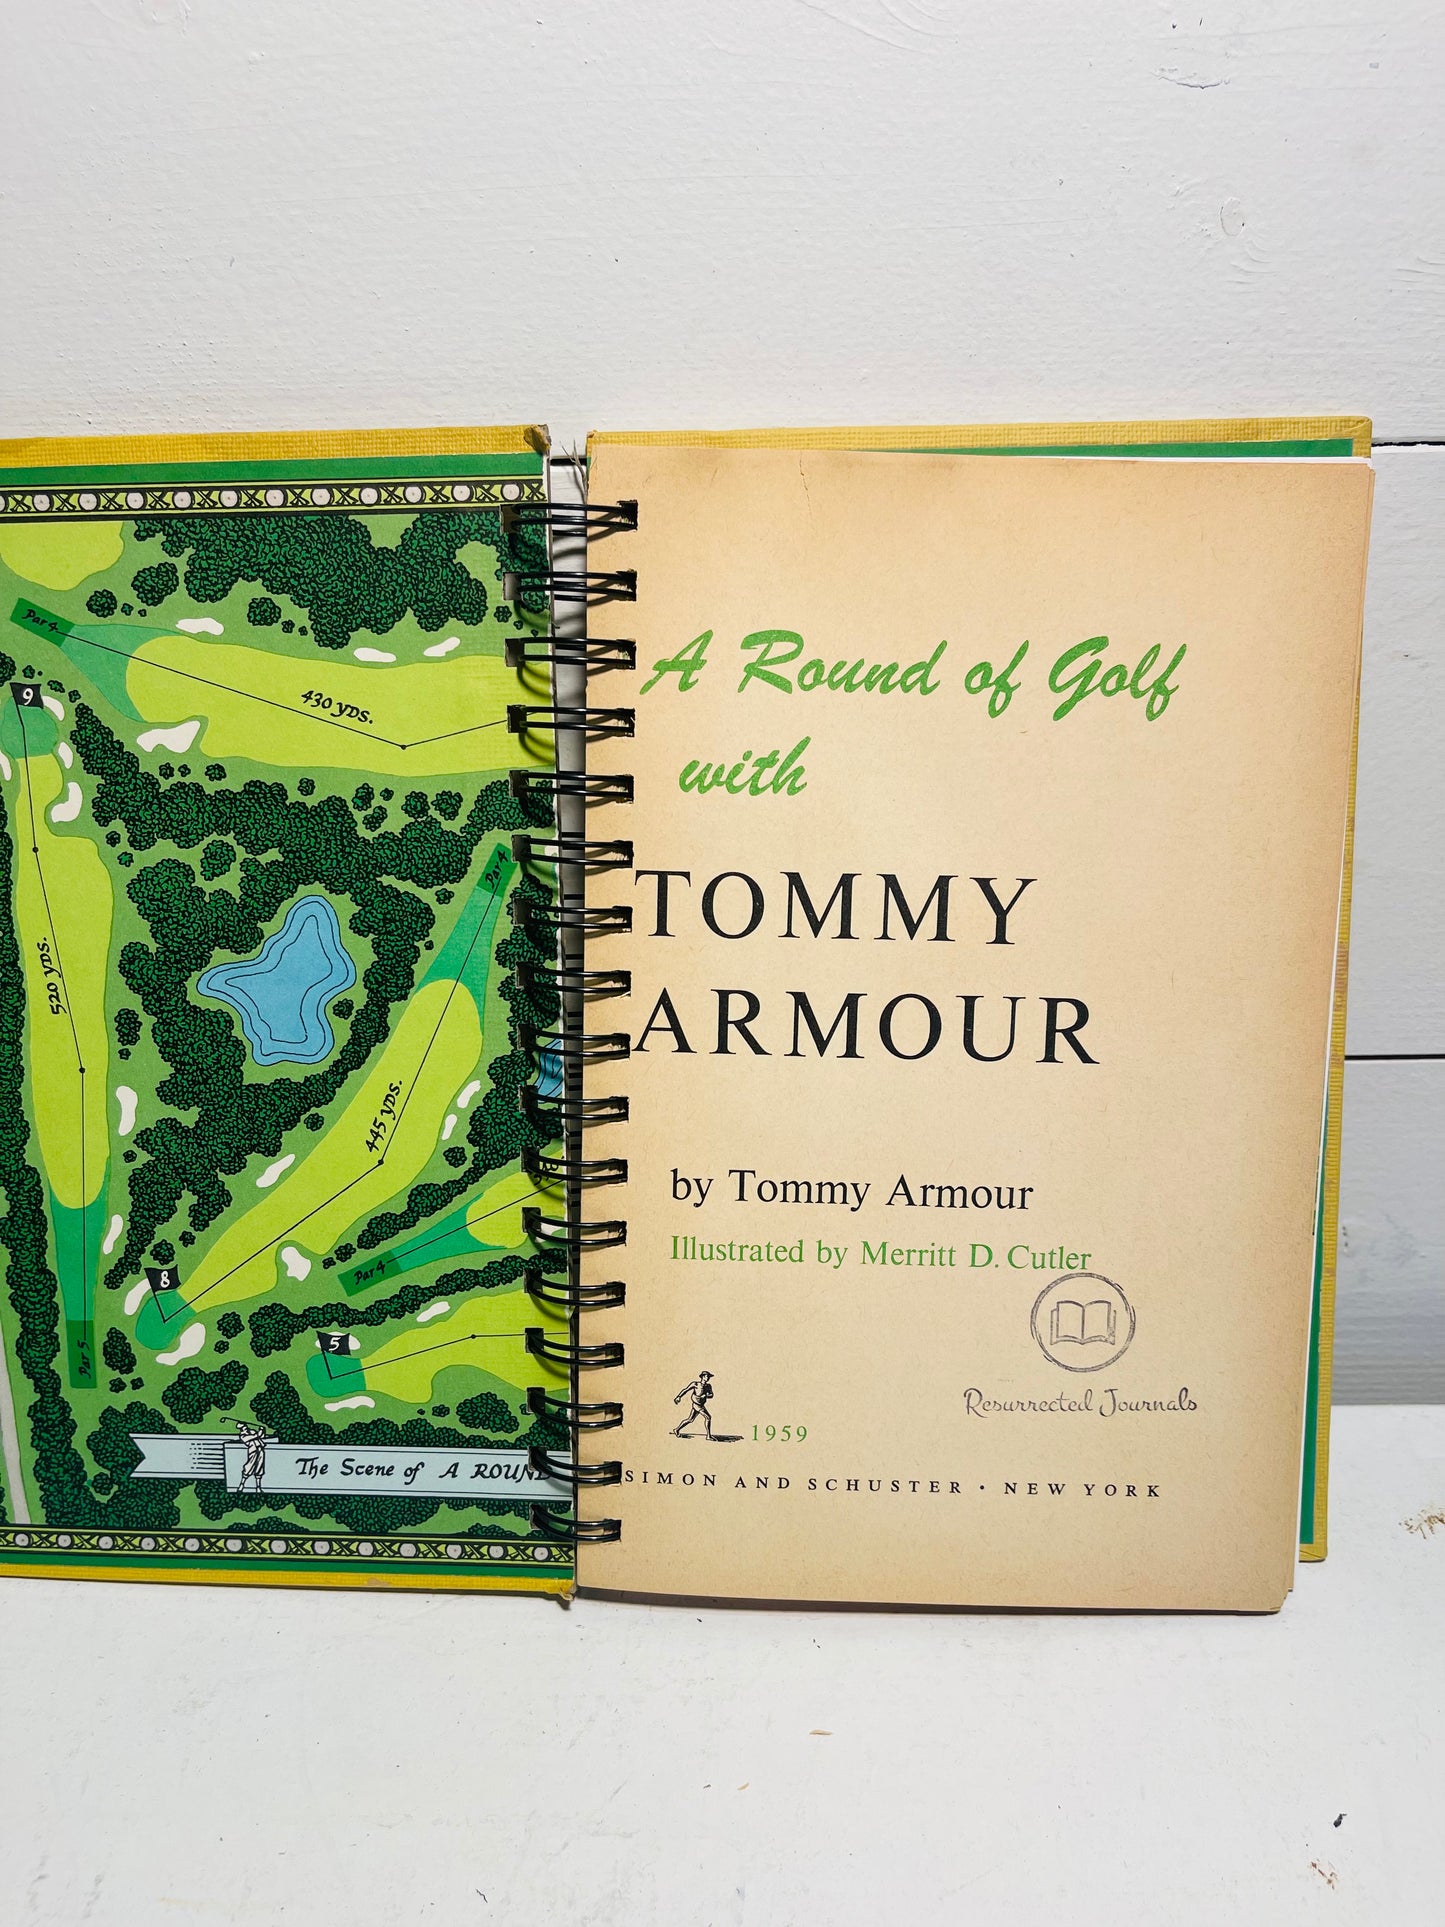 Tommy Armour Golf Book